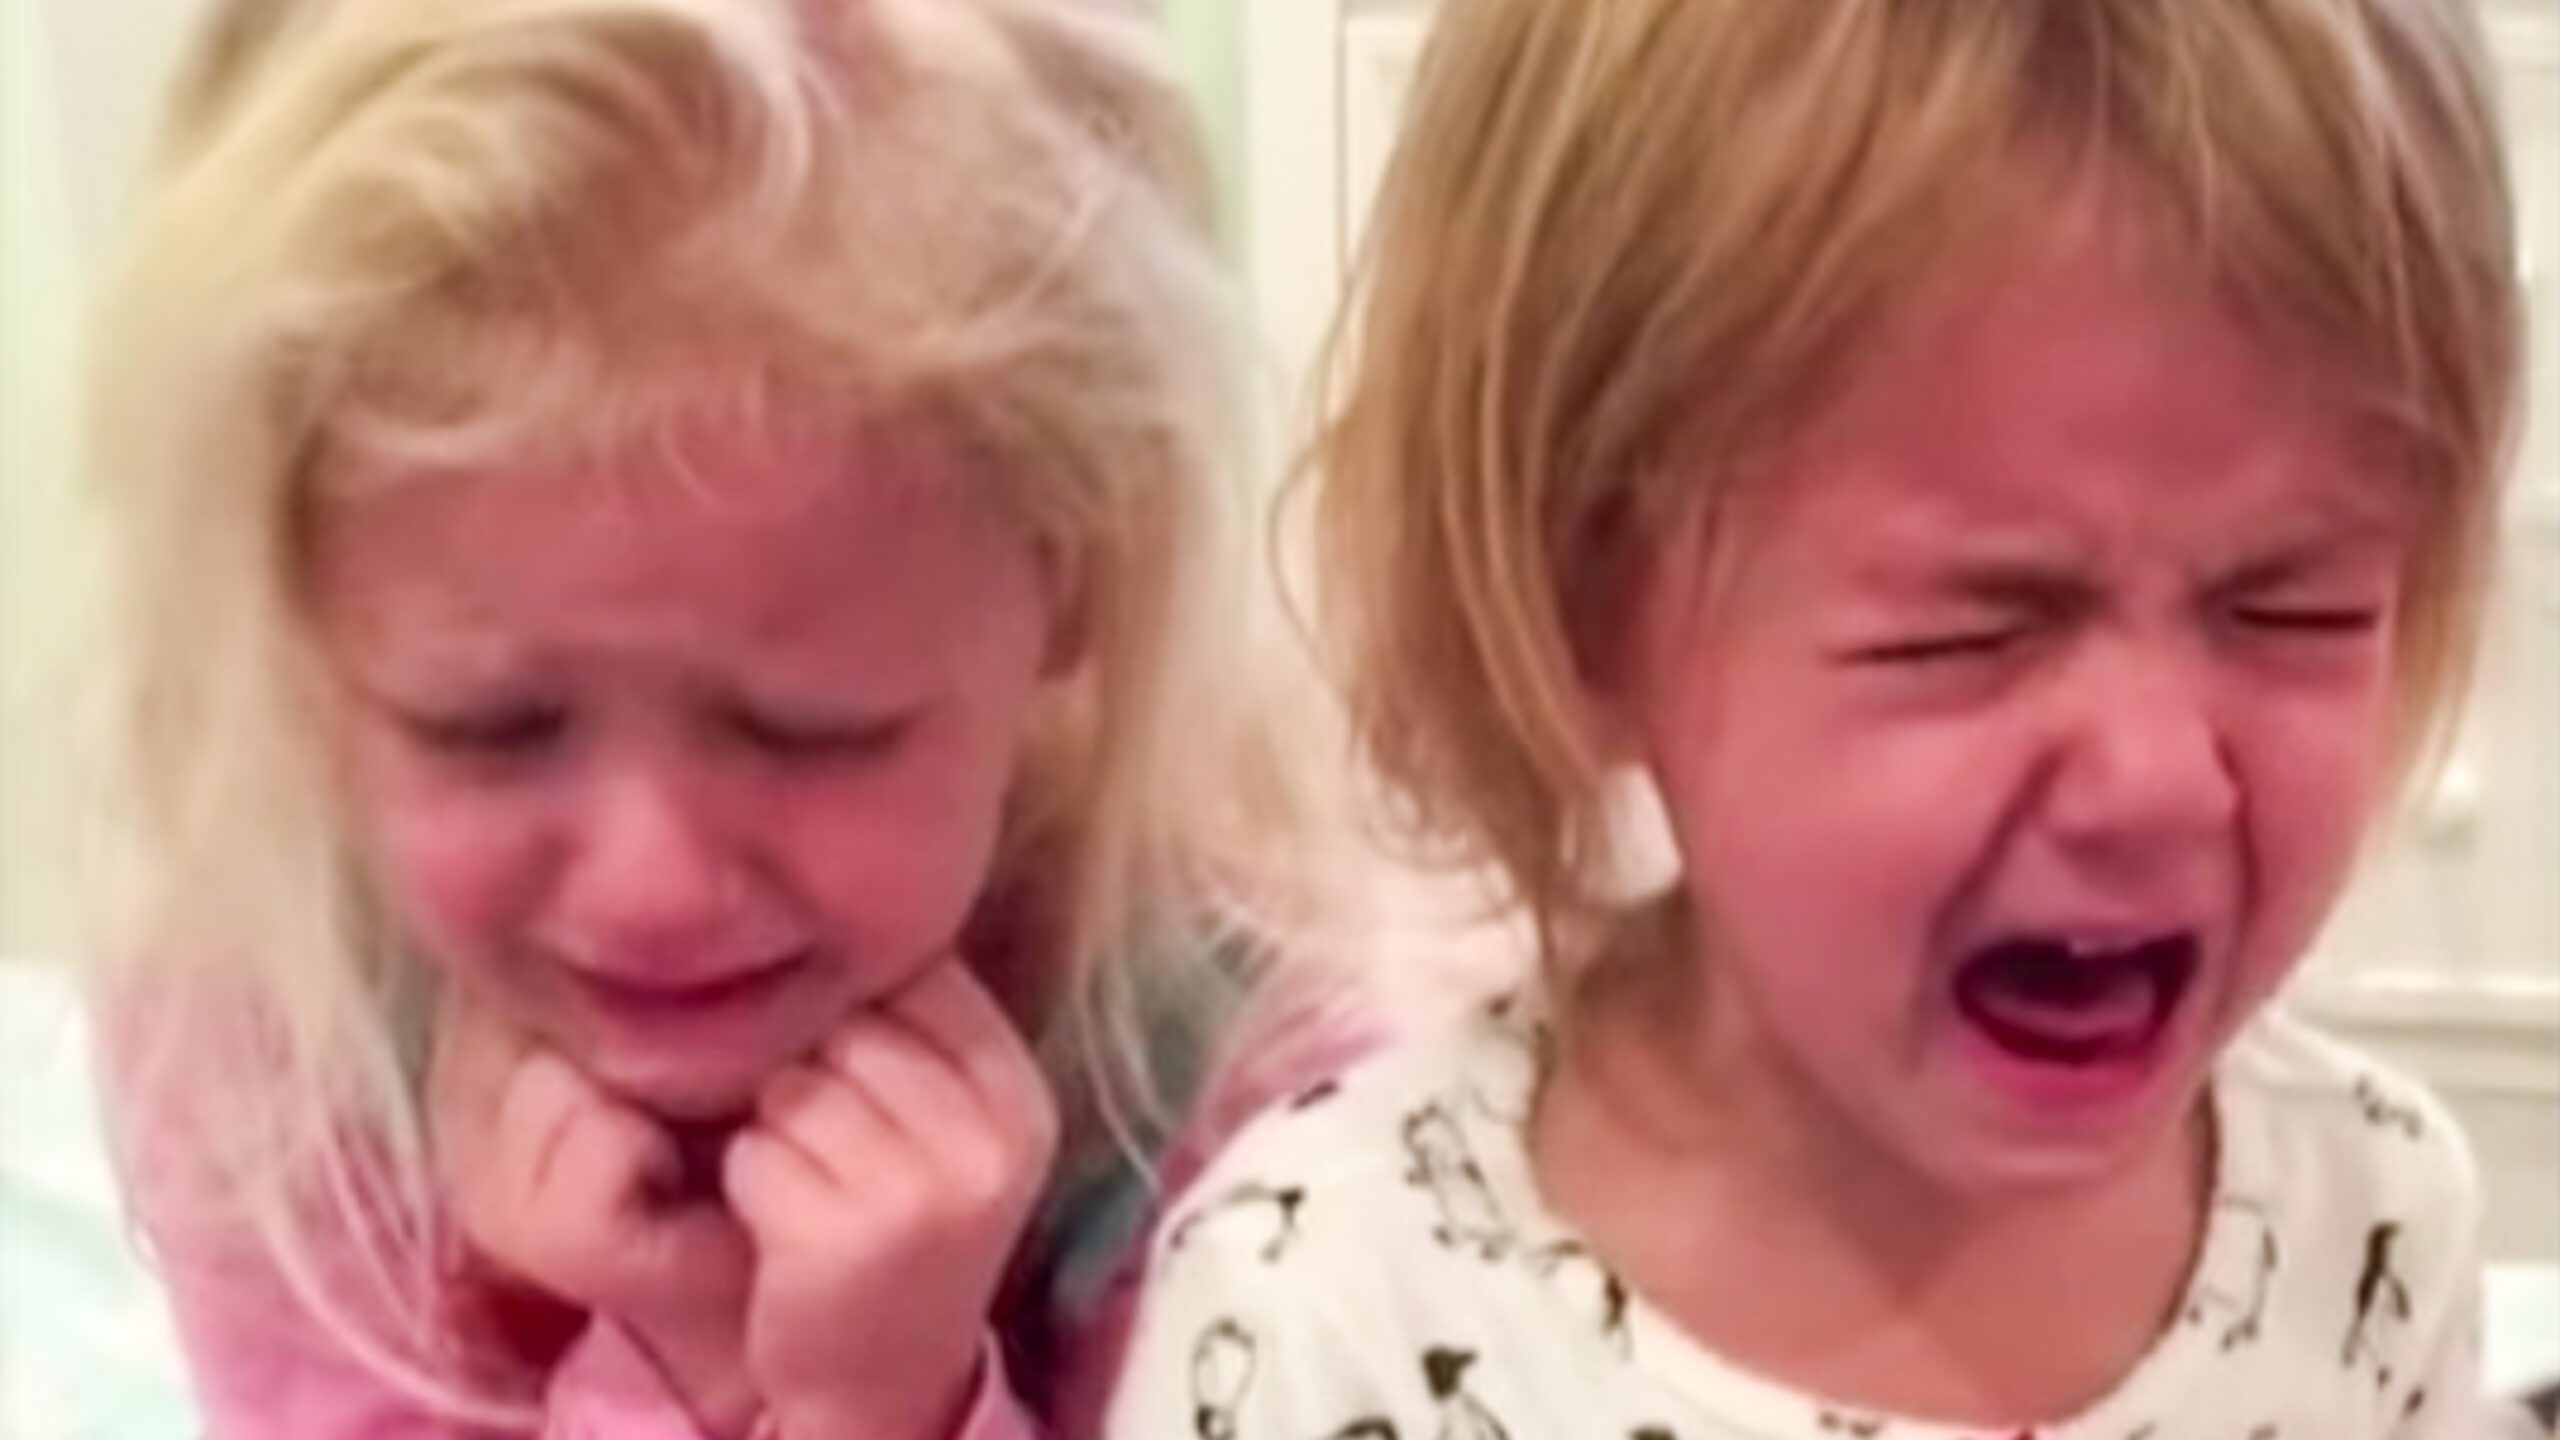 WATCH: Parents tell their kids they aren’t getting any Halloween candy